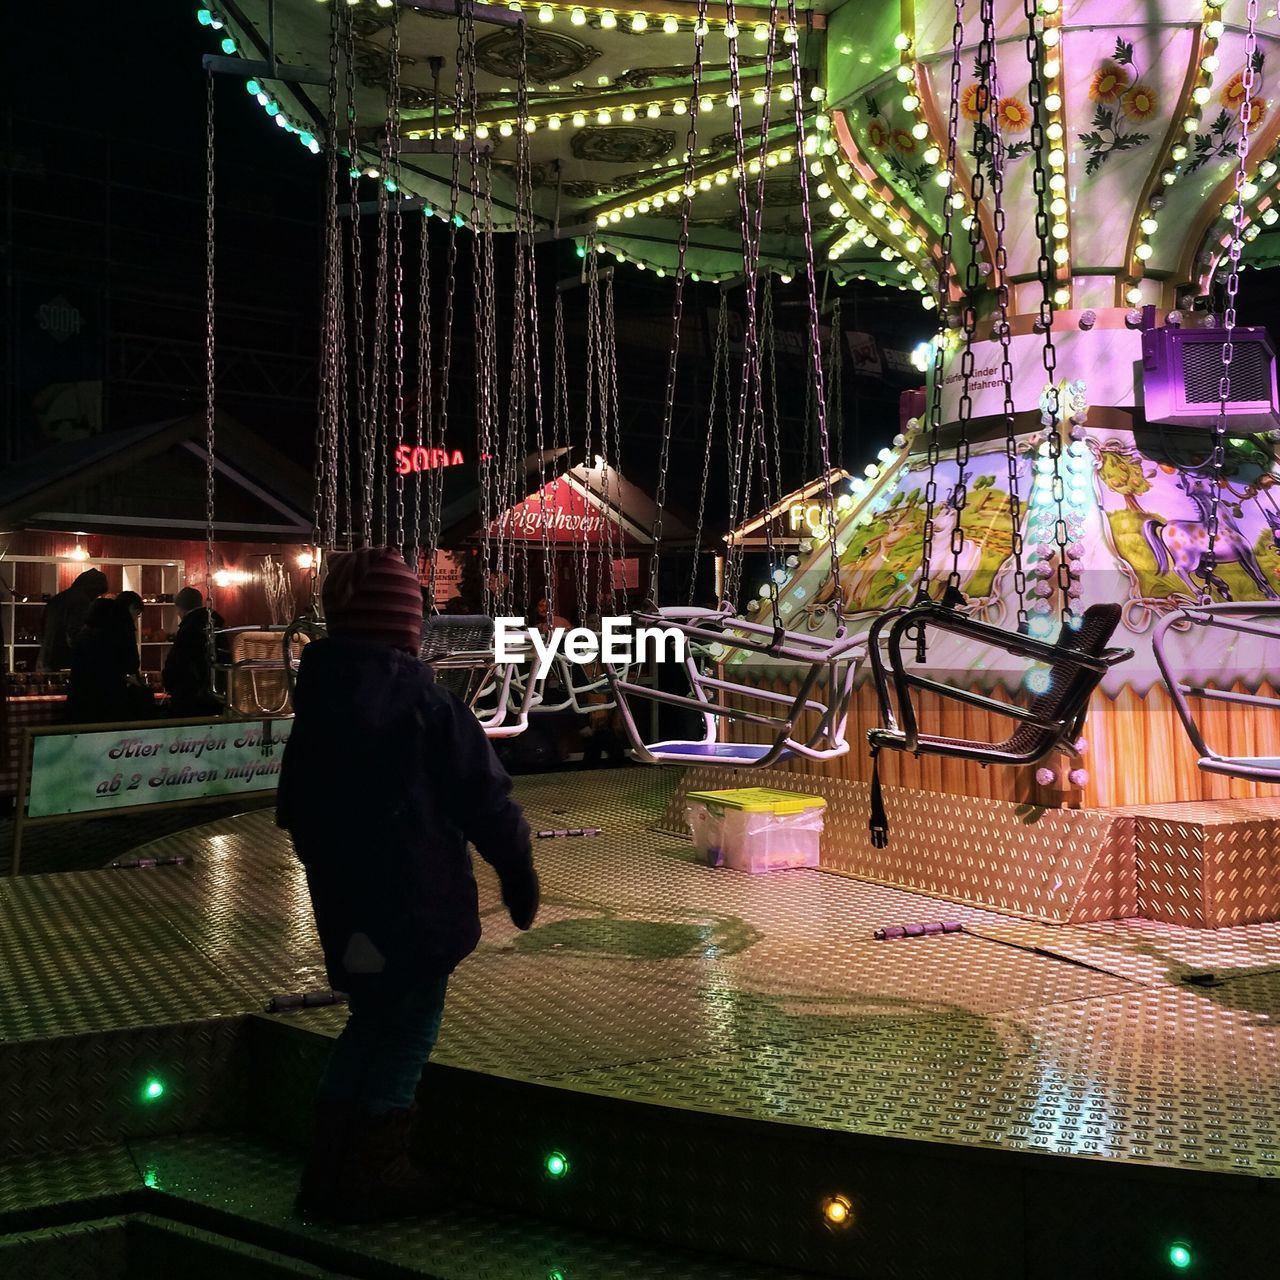 People by illuminated chain swing ride at amusement park